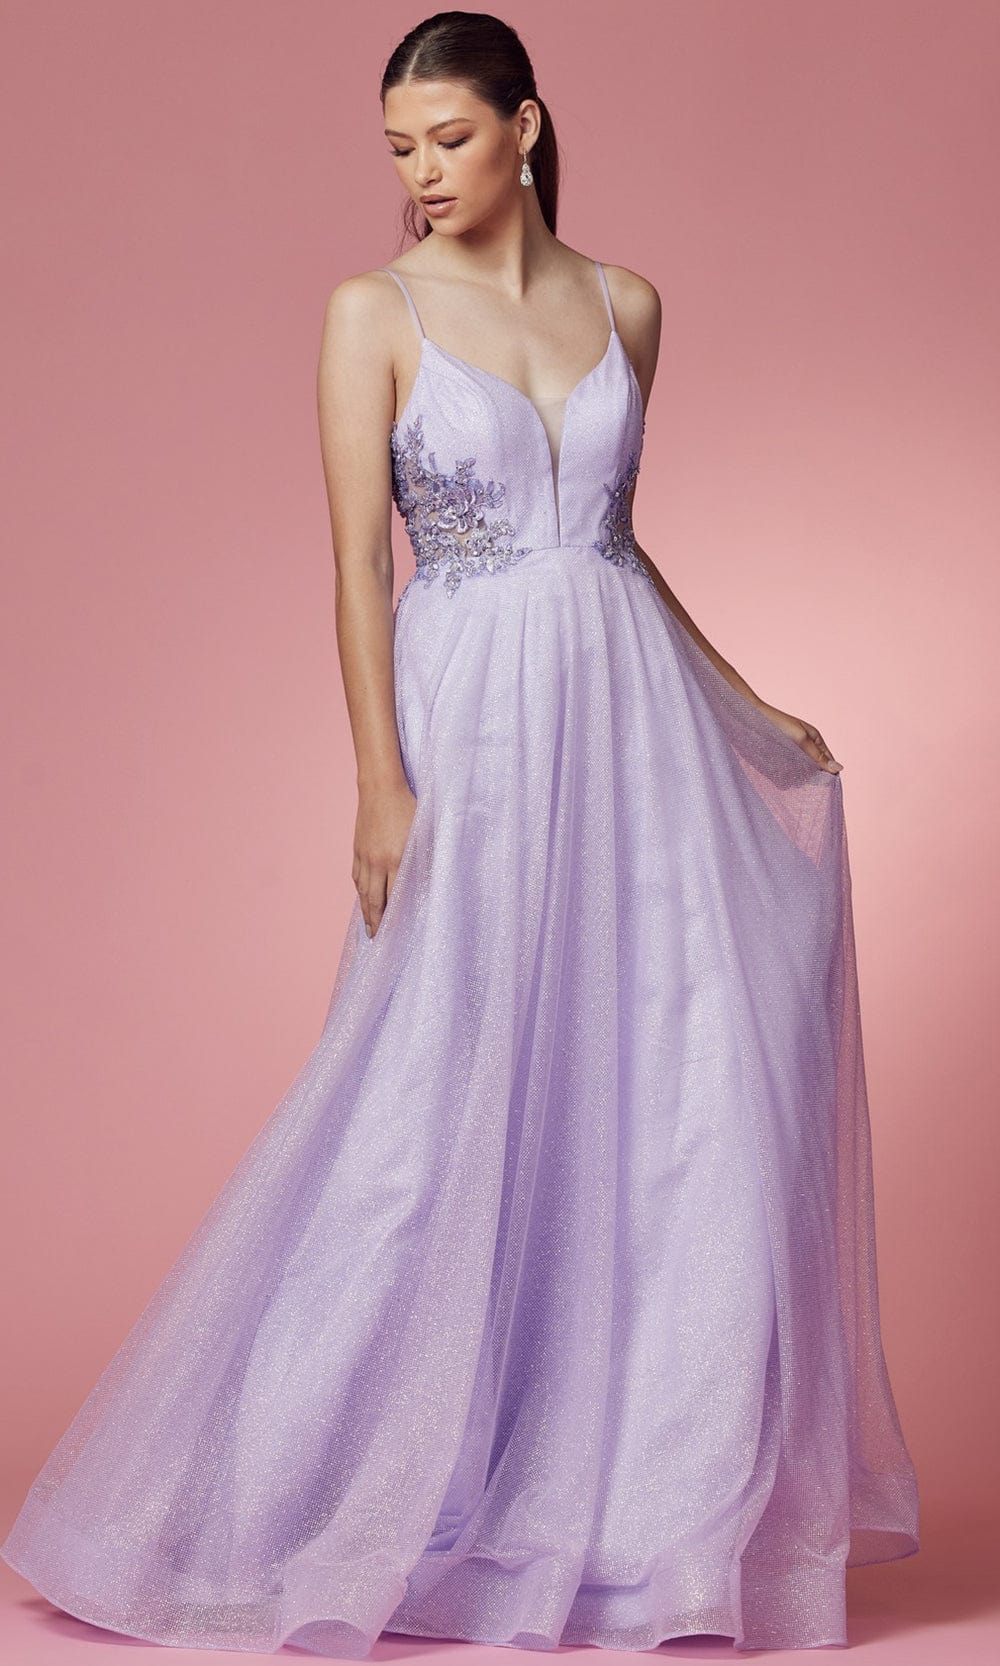 Nox Anabel T1033 - Floral Embroidered Prom Dress Prom Dresses